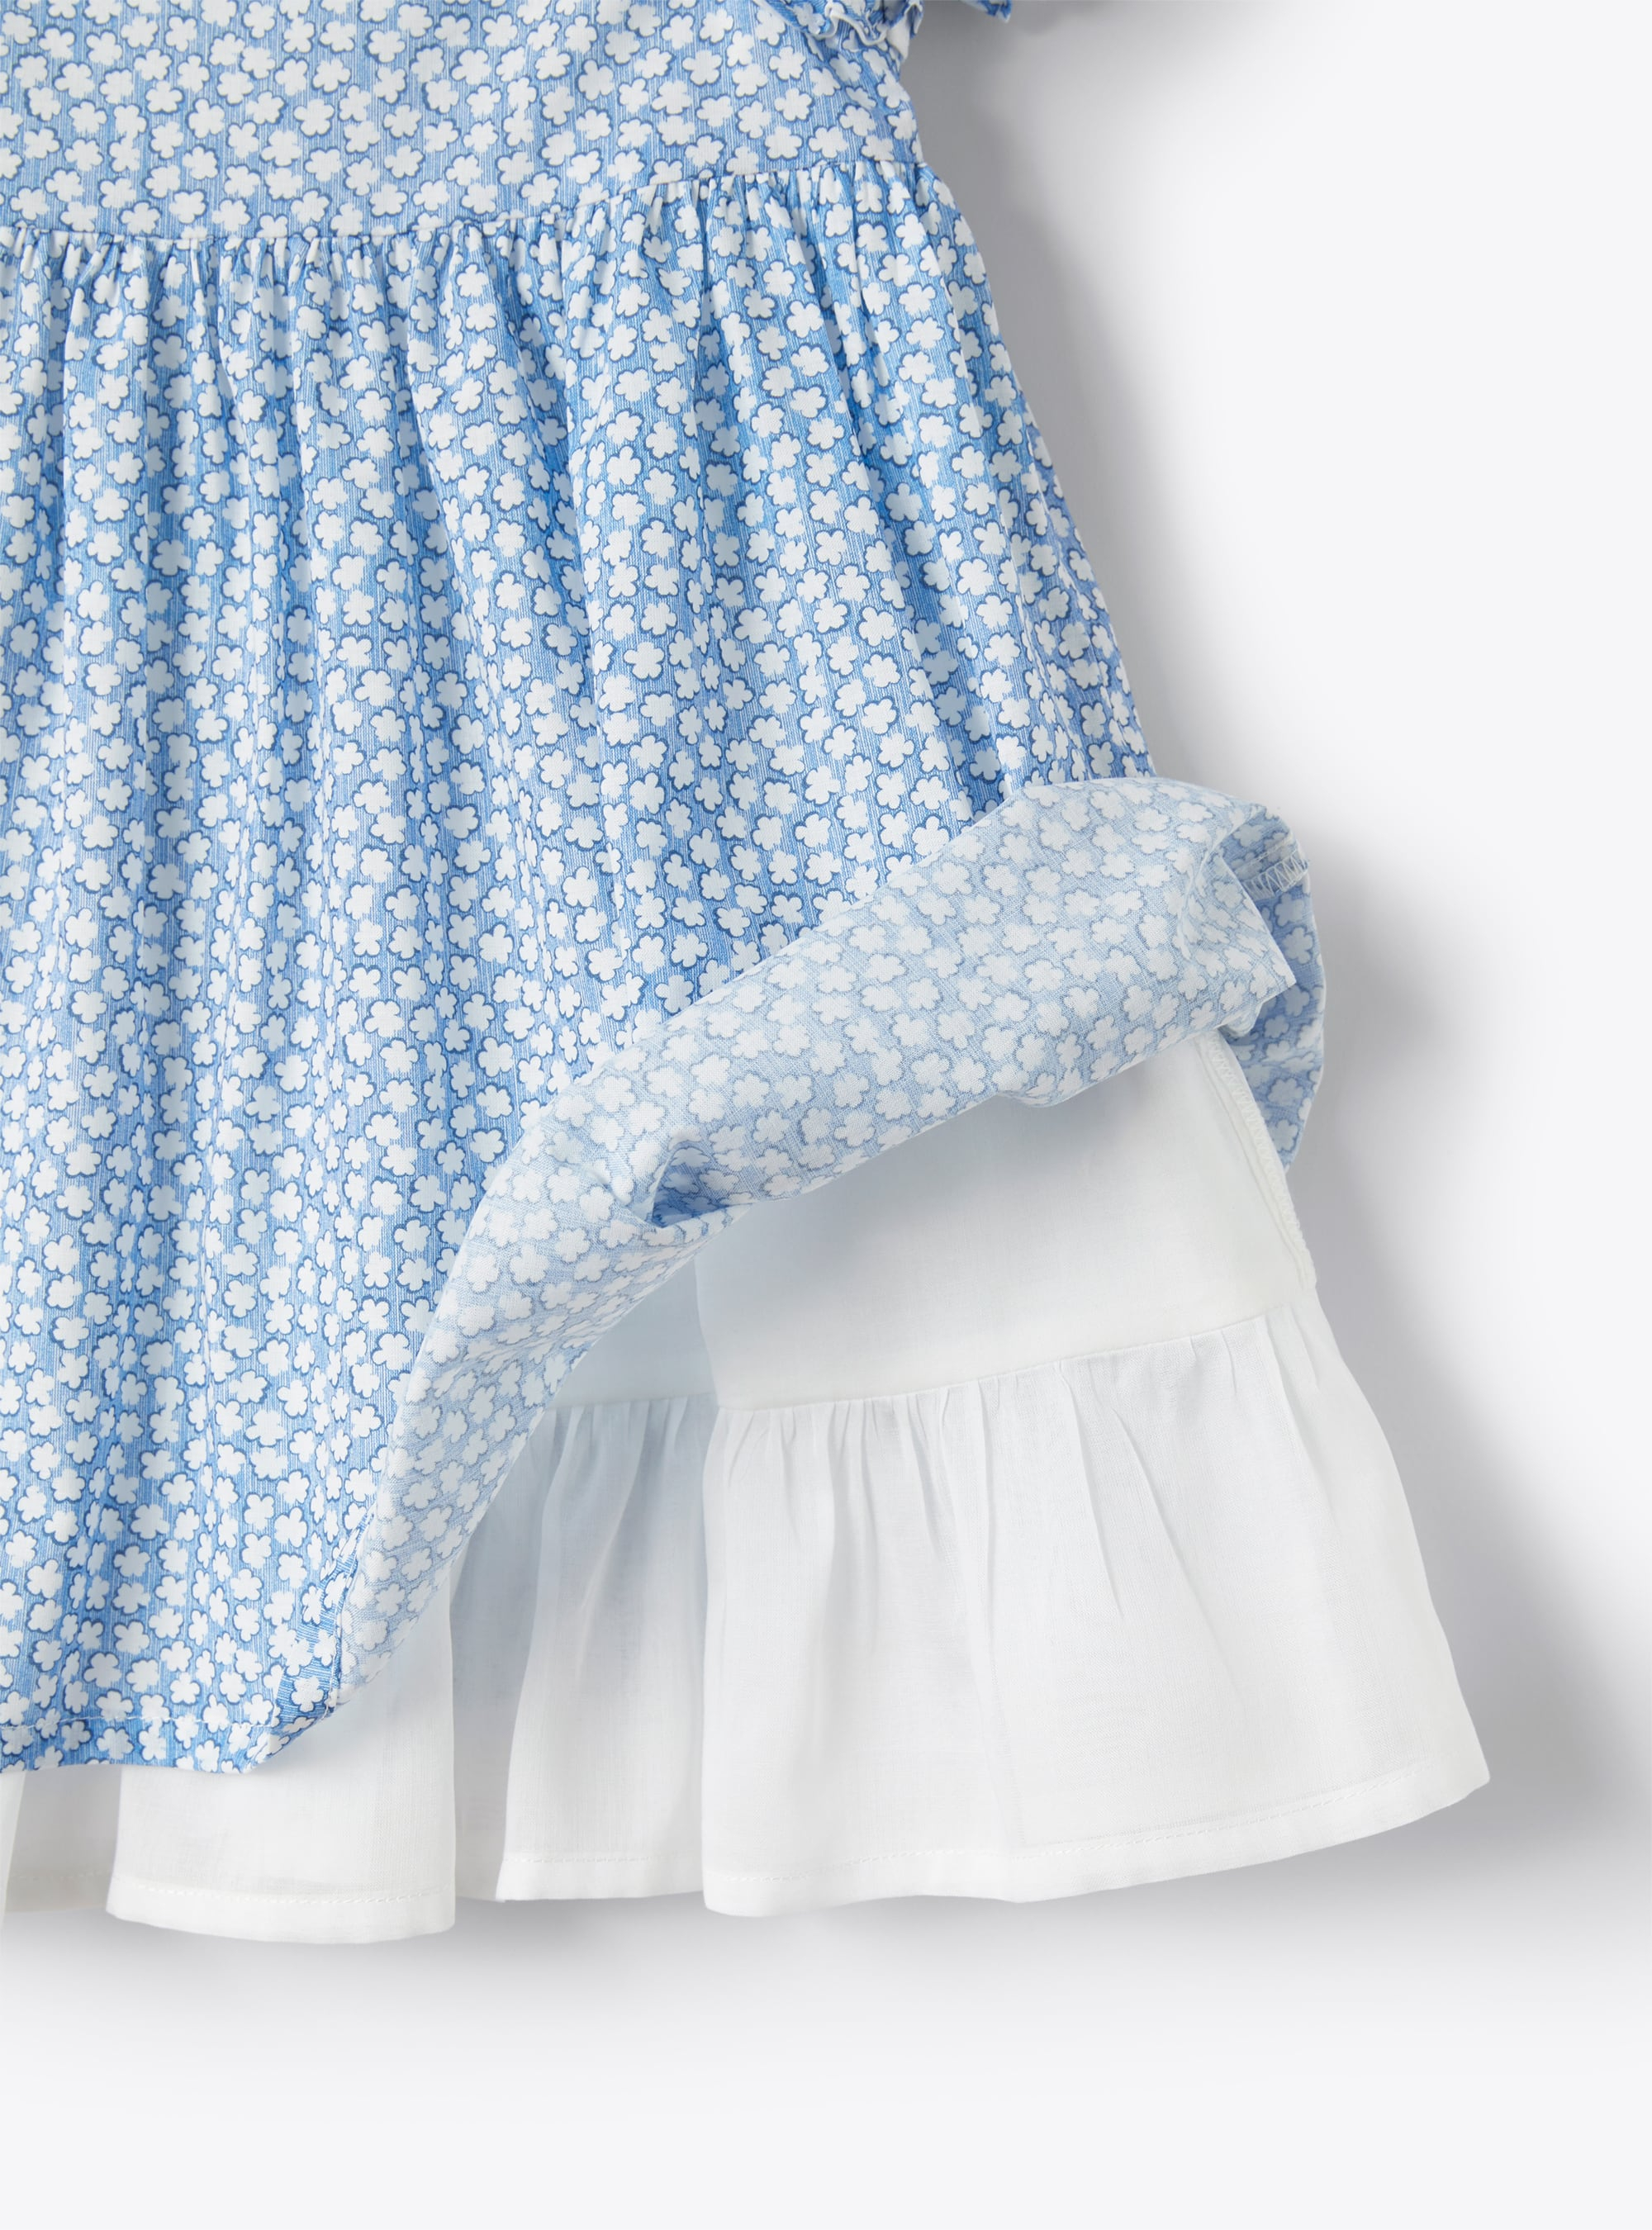 Floral-printed dress for baby girls in cobalt blue - Blue | Il Gufo